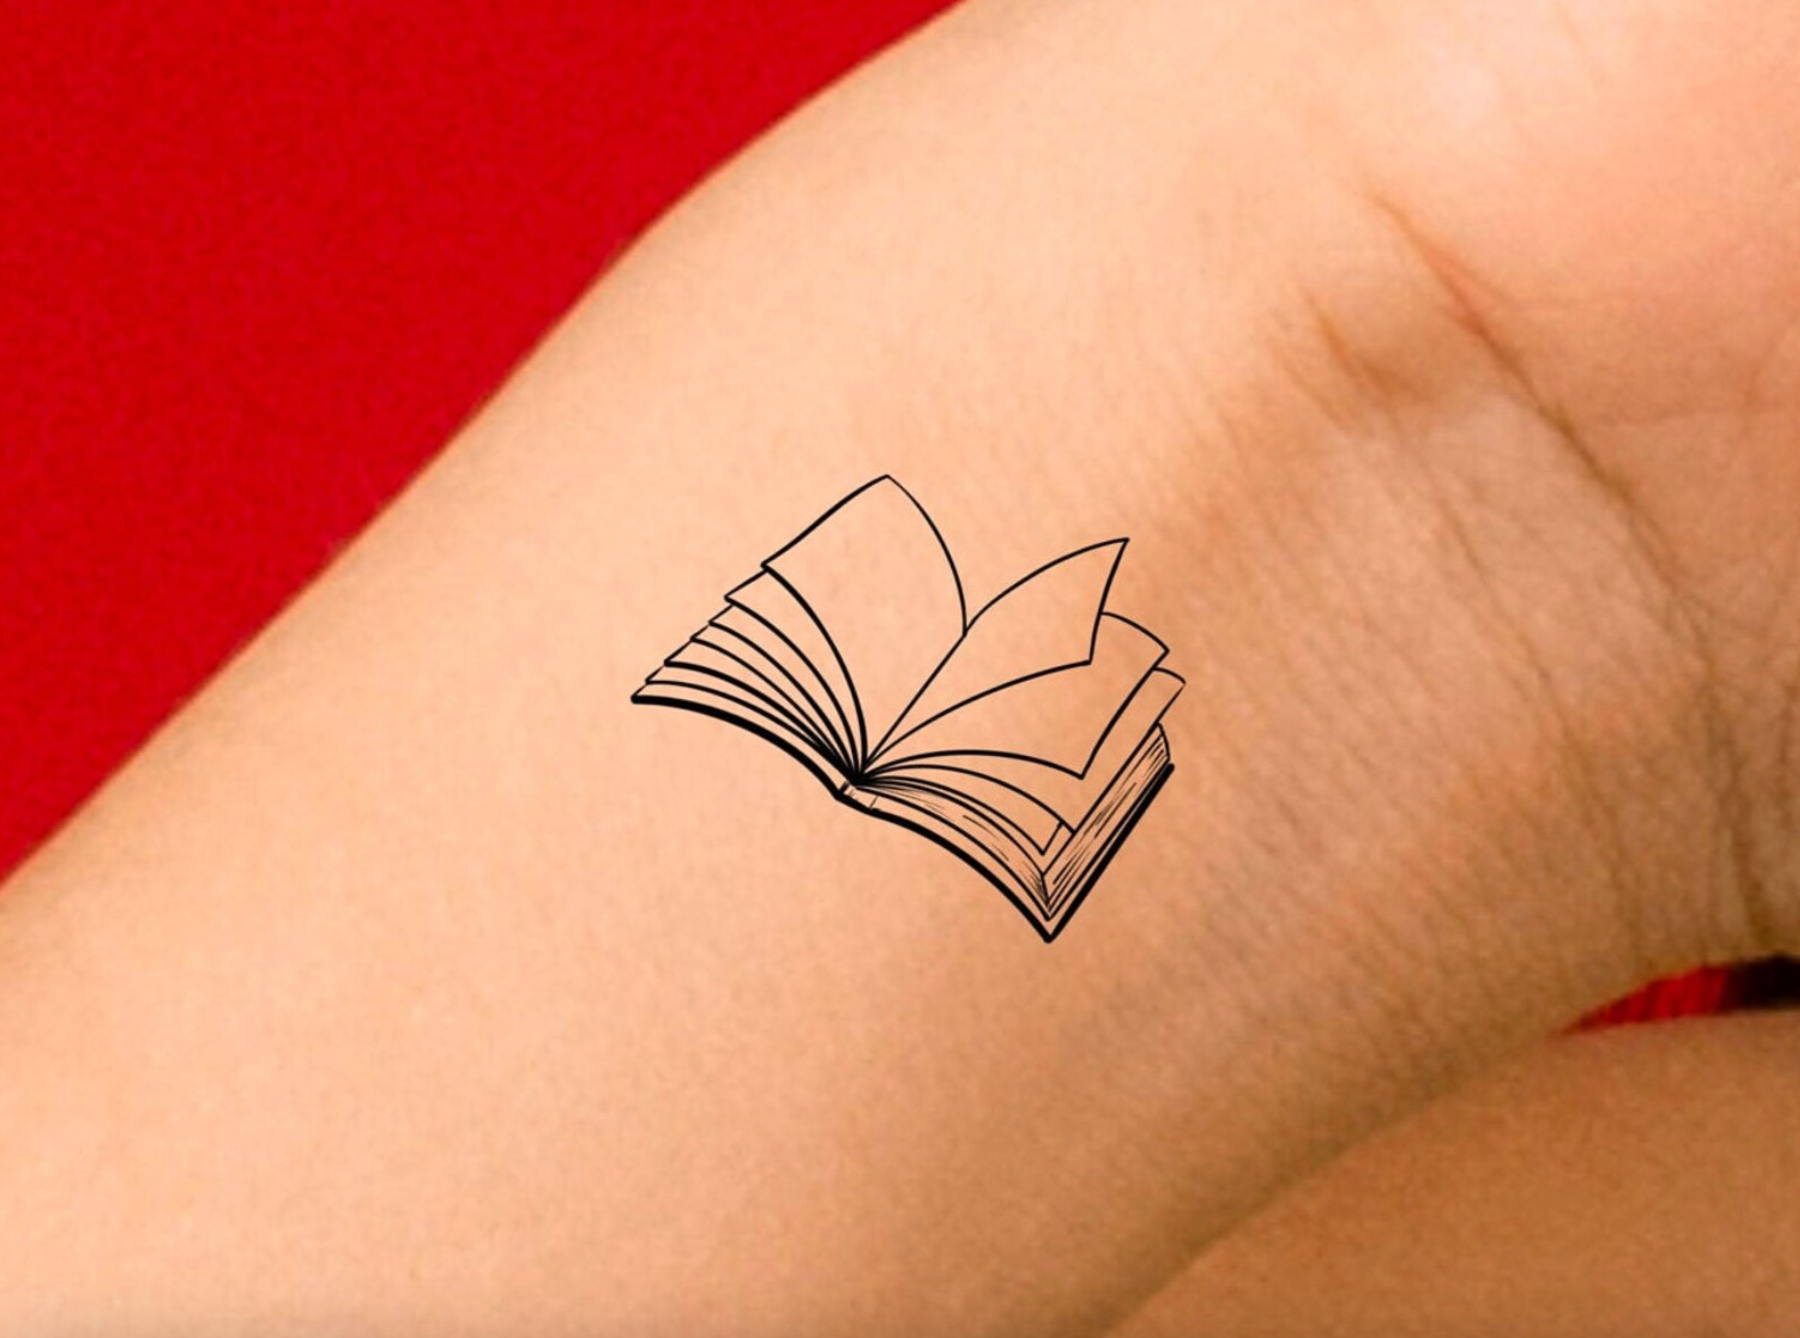 A simple black lined tattoo of an open book on the inside of a person's wrist